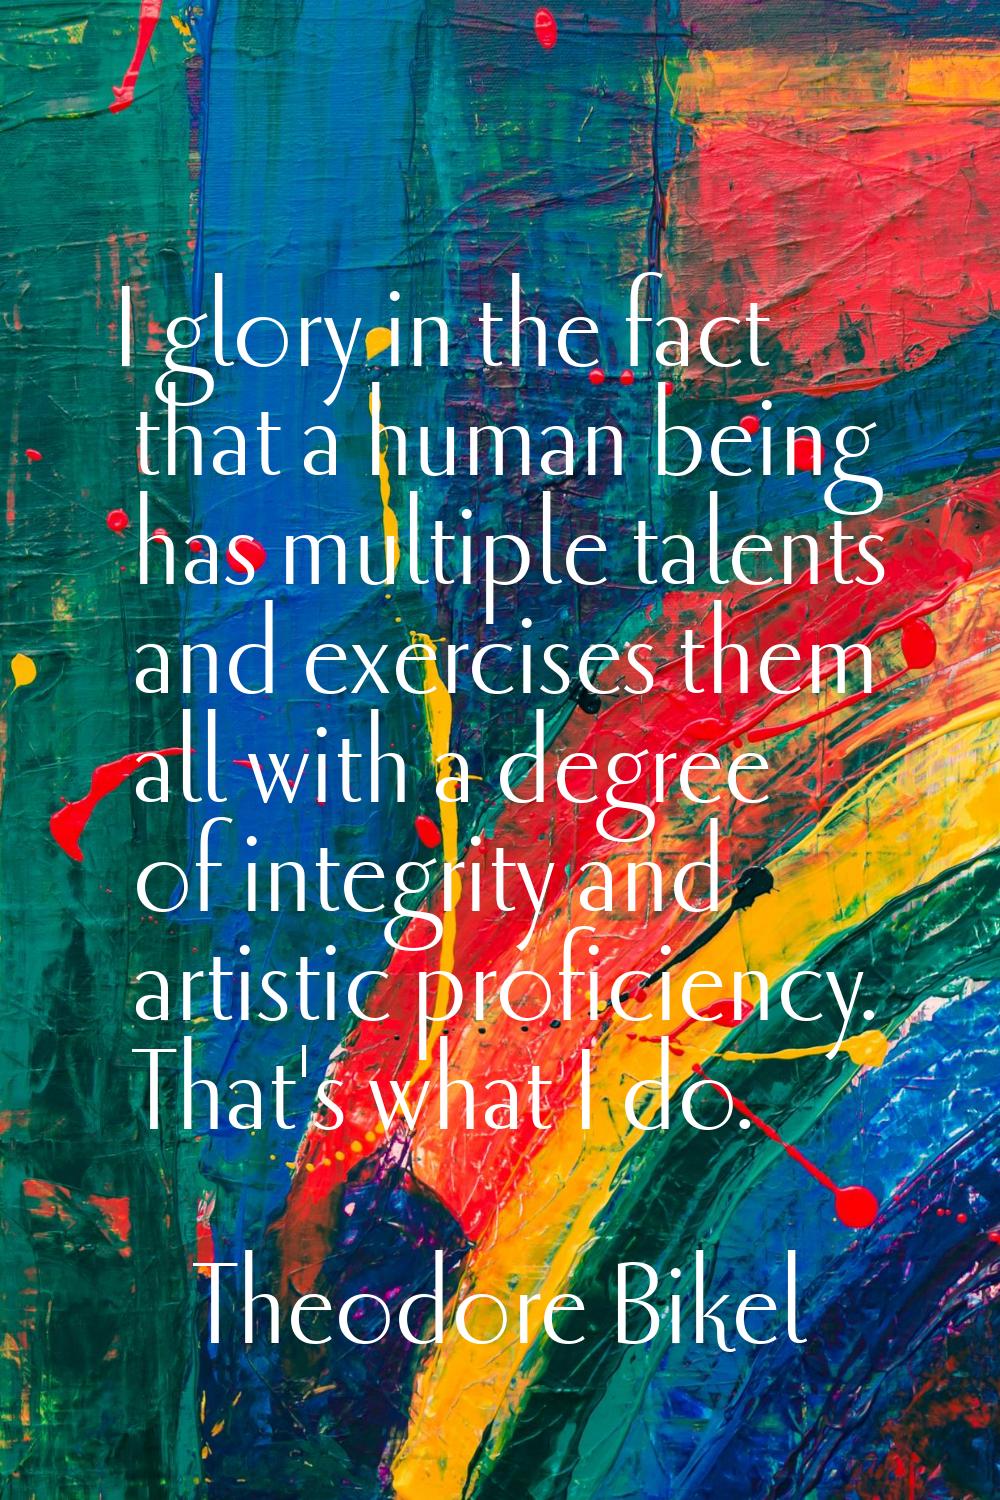 I glory in the fact that a human being has multiple talents and exercises them all with a degree of